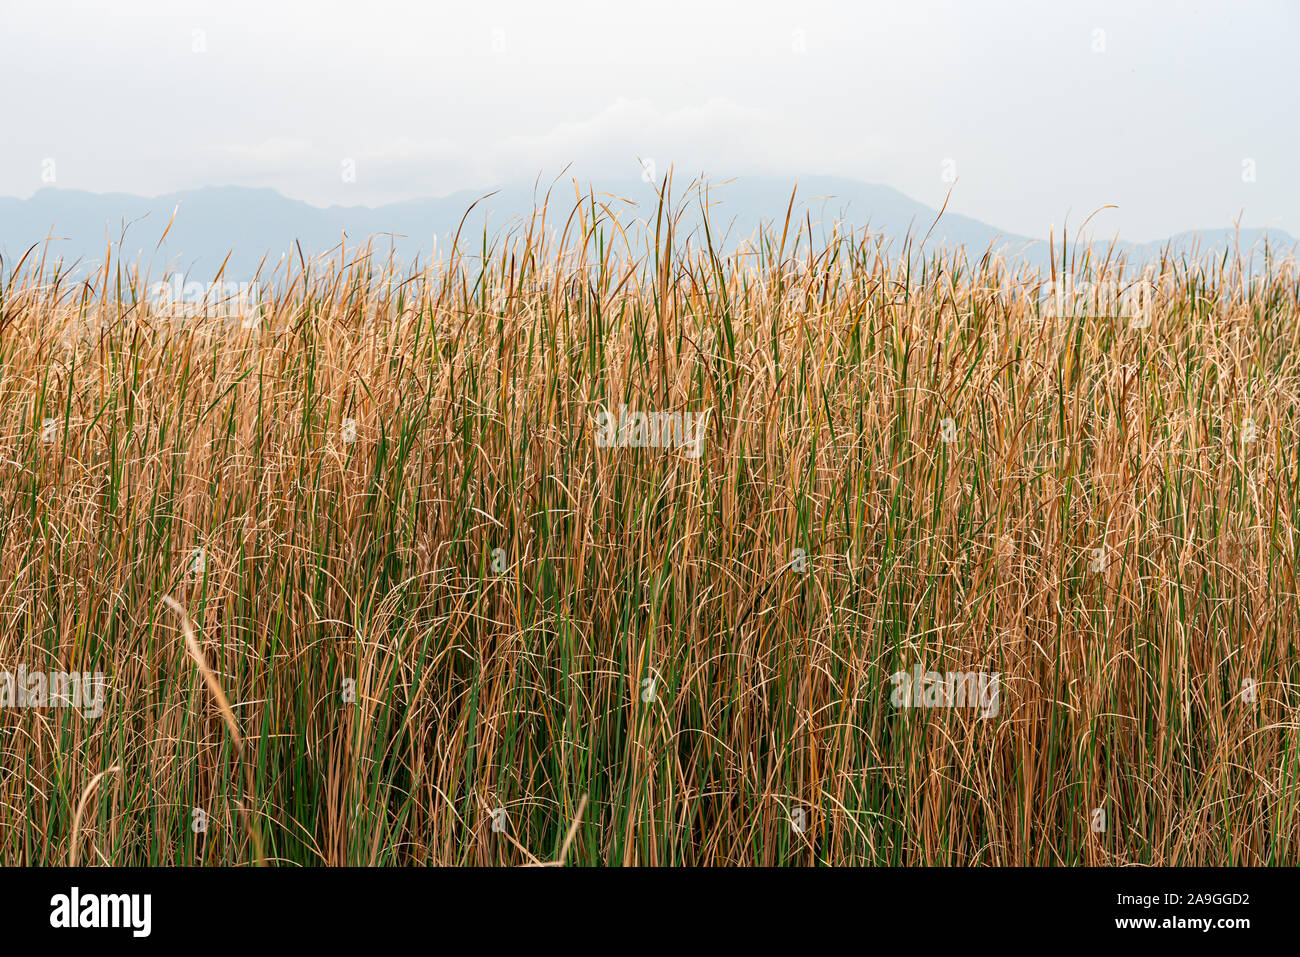 Cluster of autumn vegetation Typha domingensis, known commonly as southern cattail or cumbungi against mountains Stock Photo